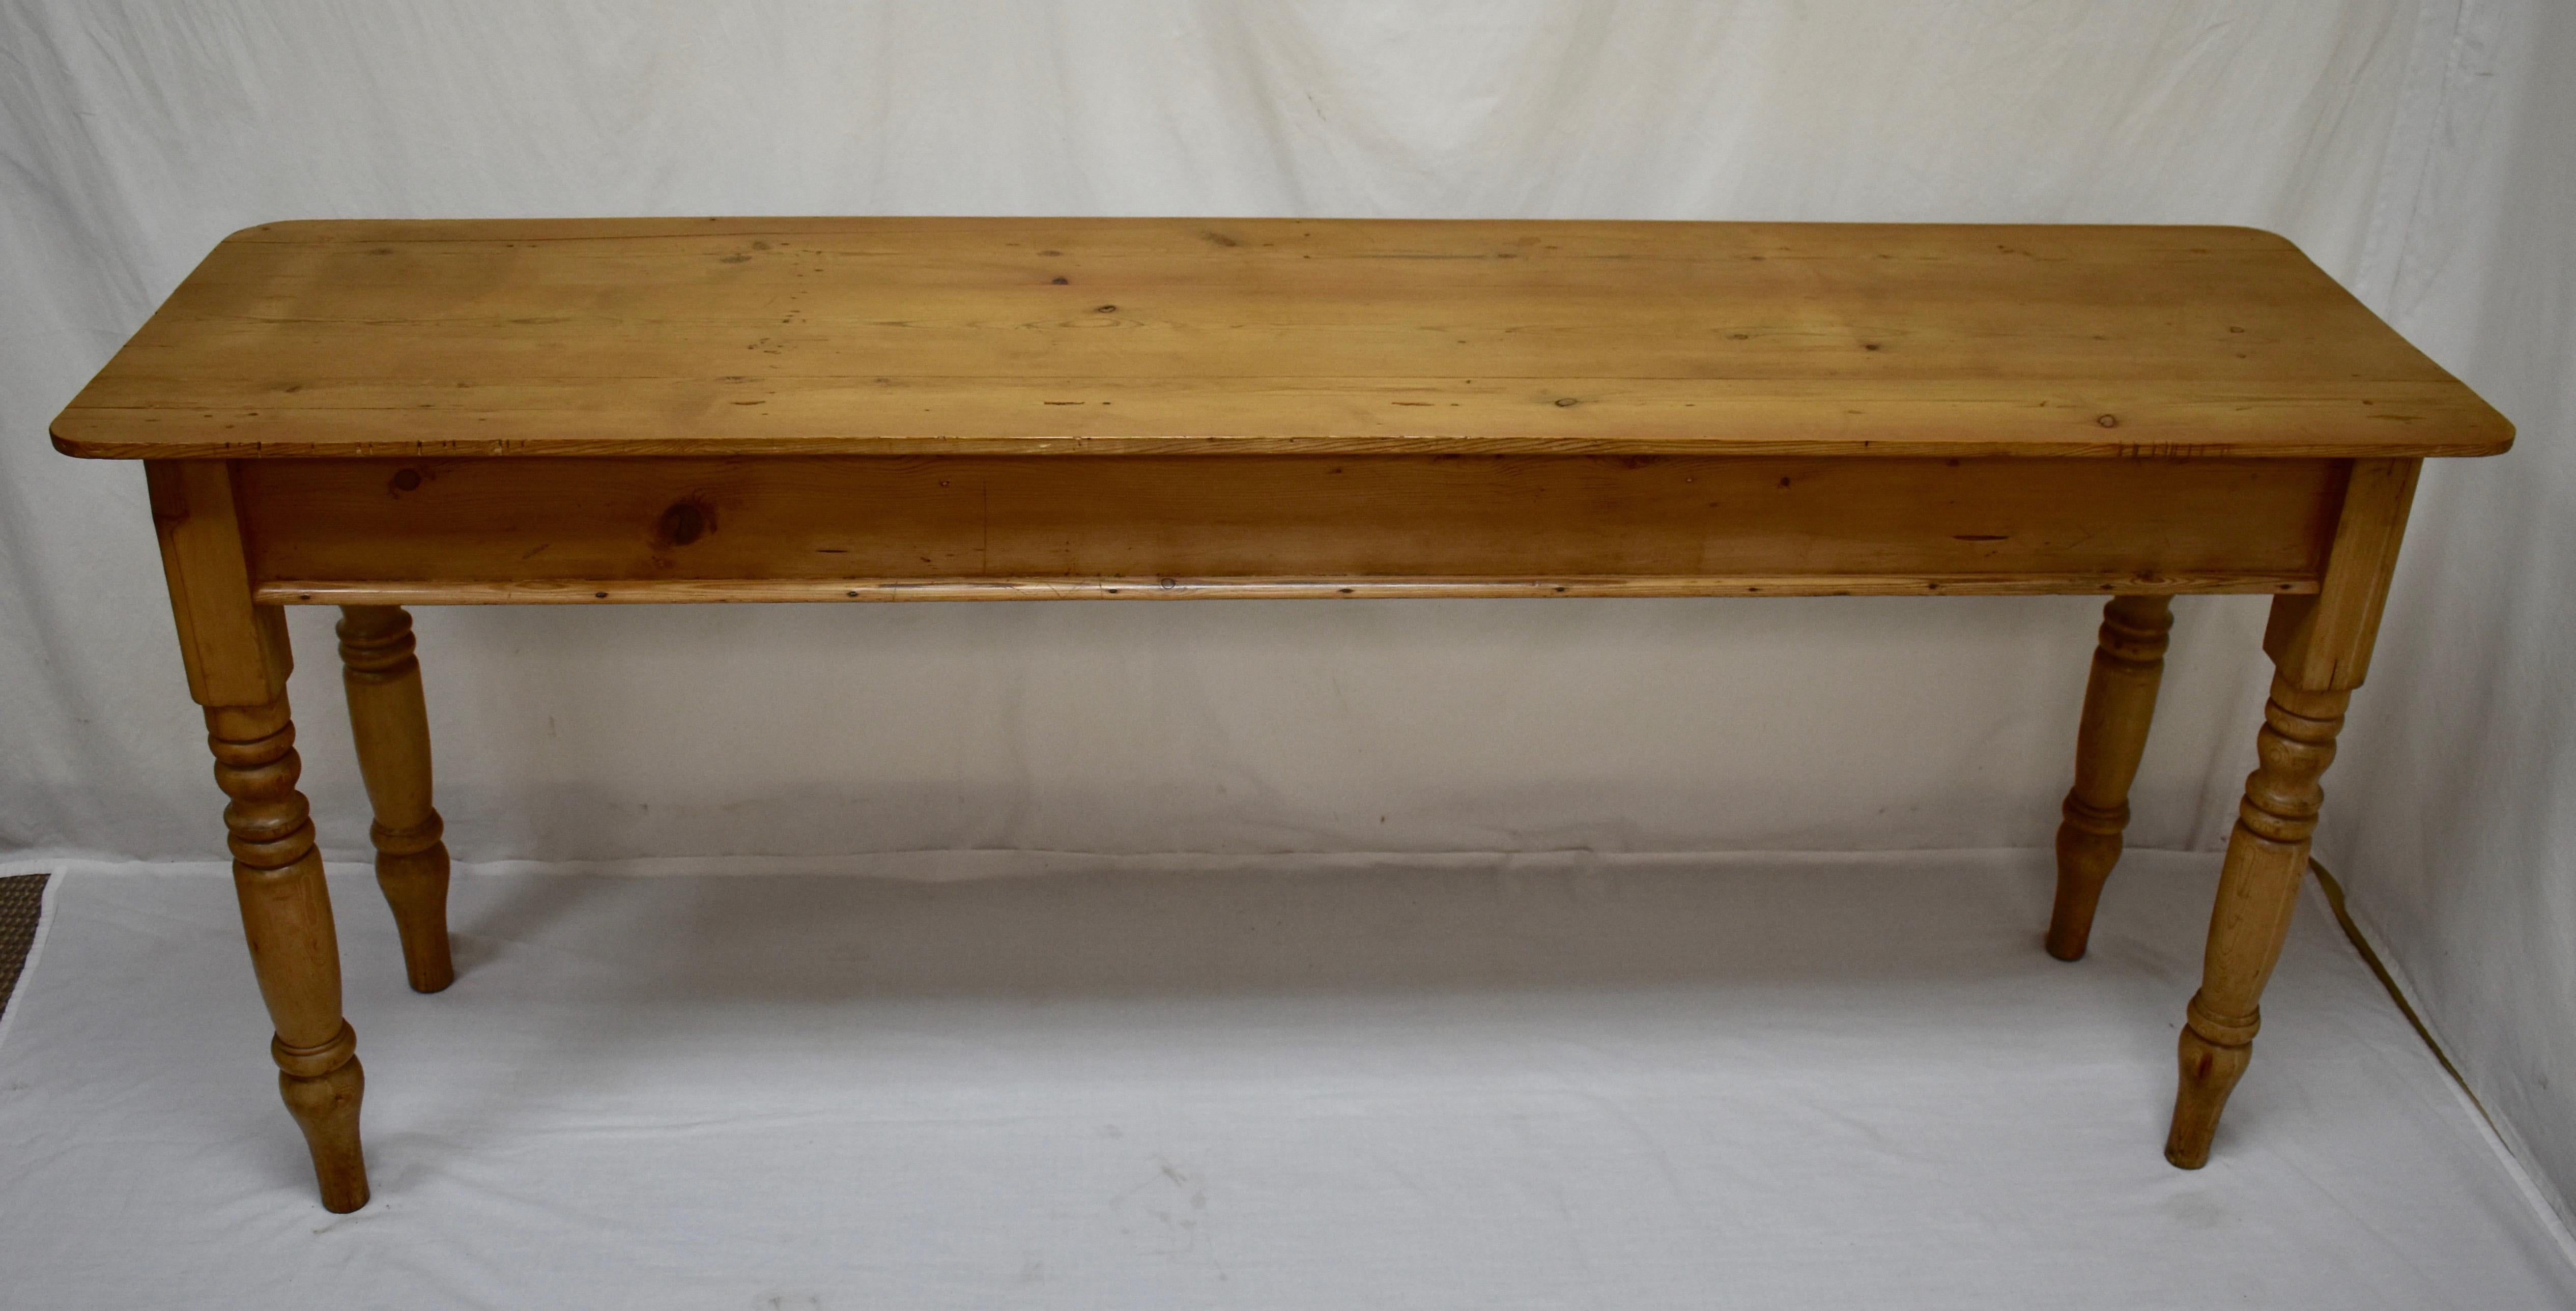 This is a well-proportioned late 19th century English pine side table. The thin three board top is reinforced by two sturdy cross members on the underside. It is somewhat stained with some small repairs. The turned legs are nicely rounded at the top